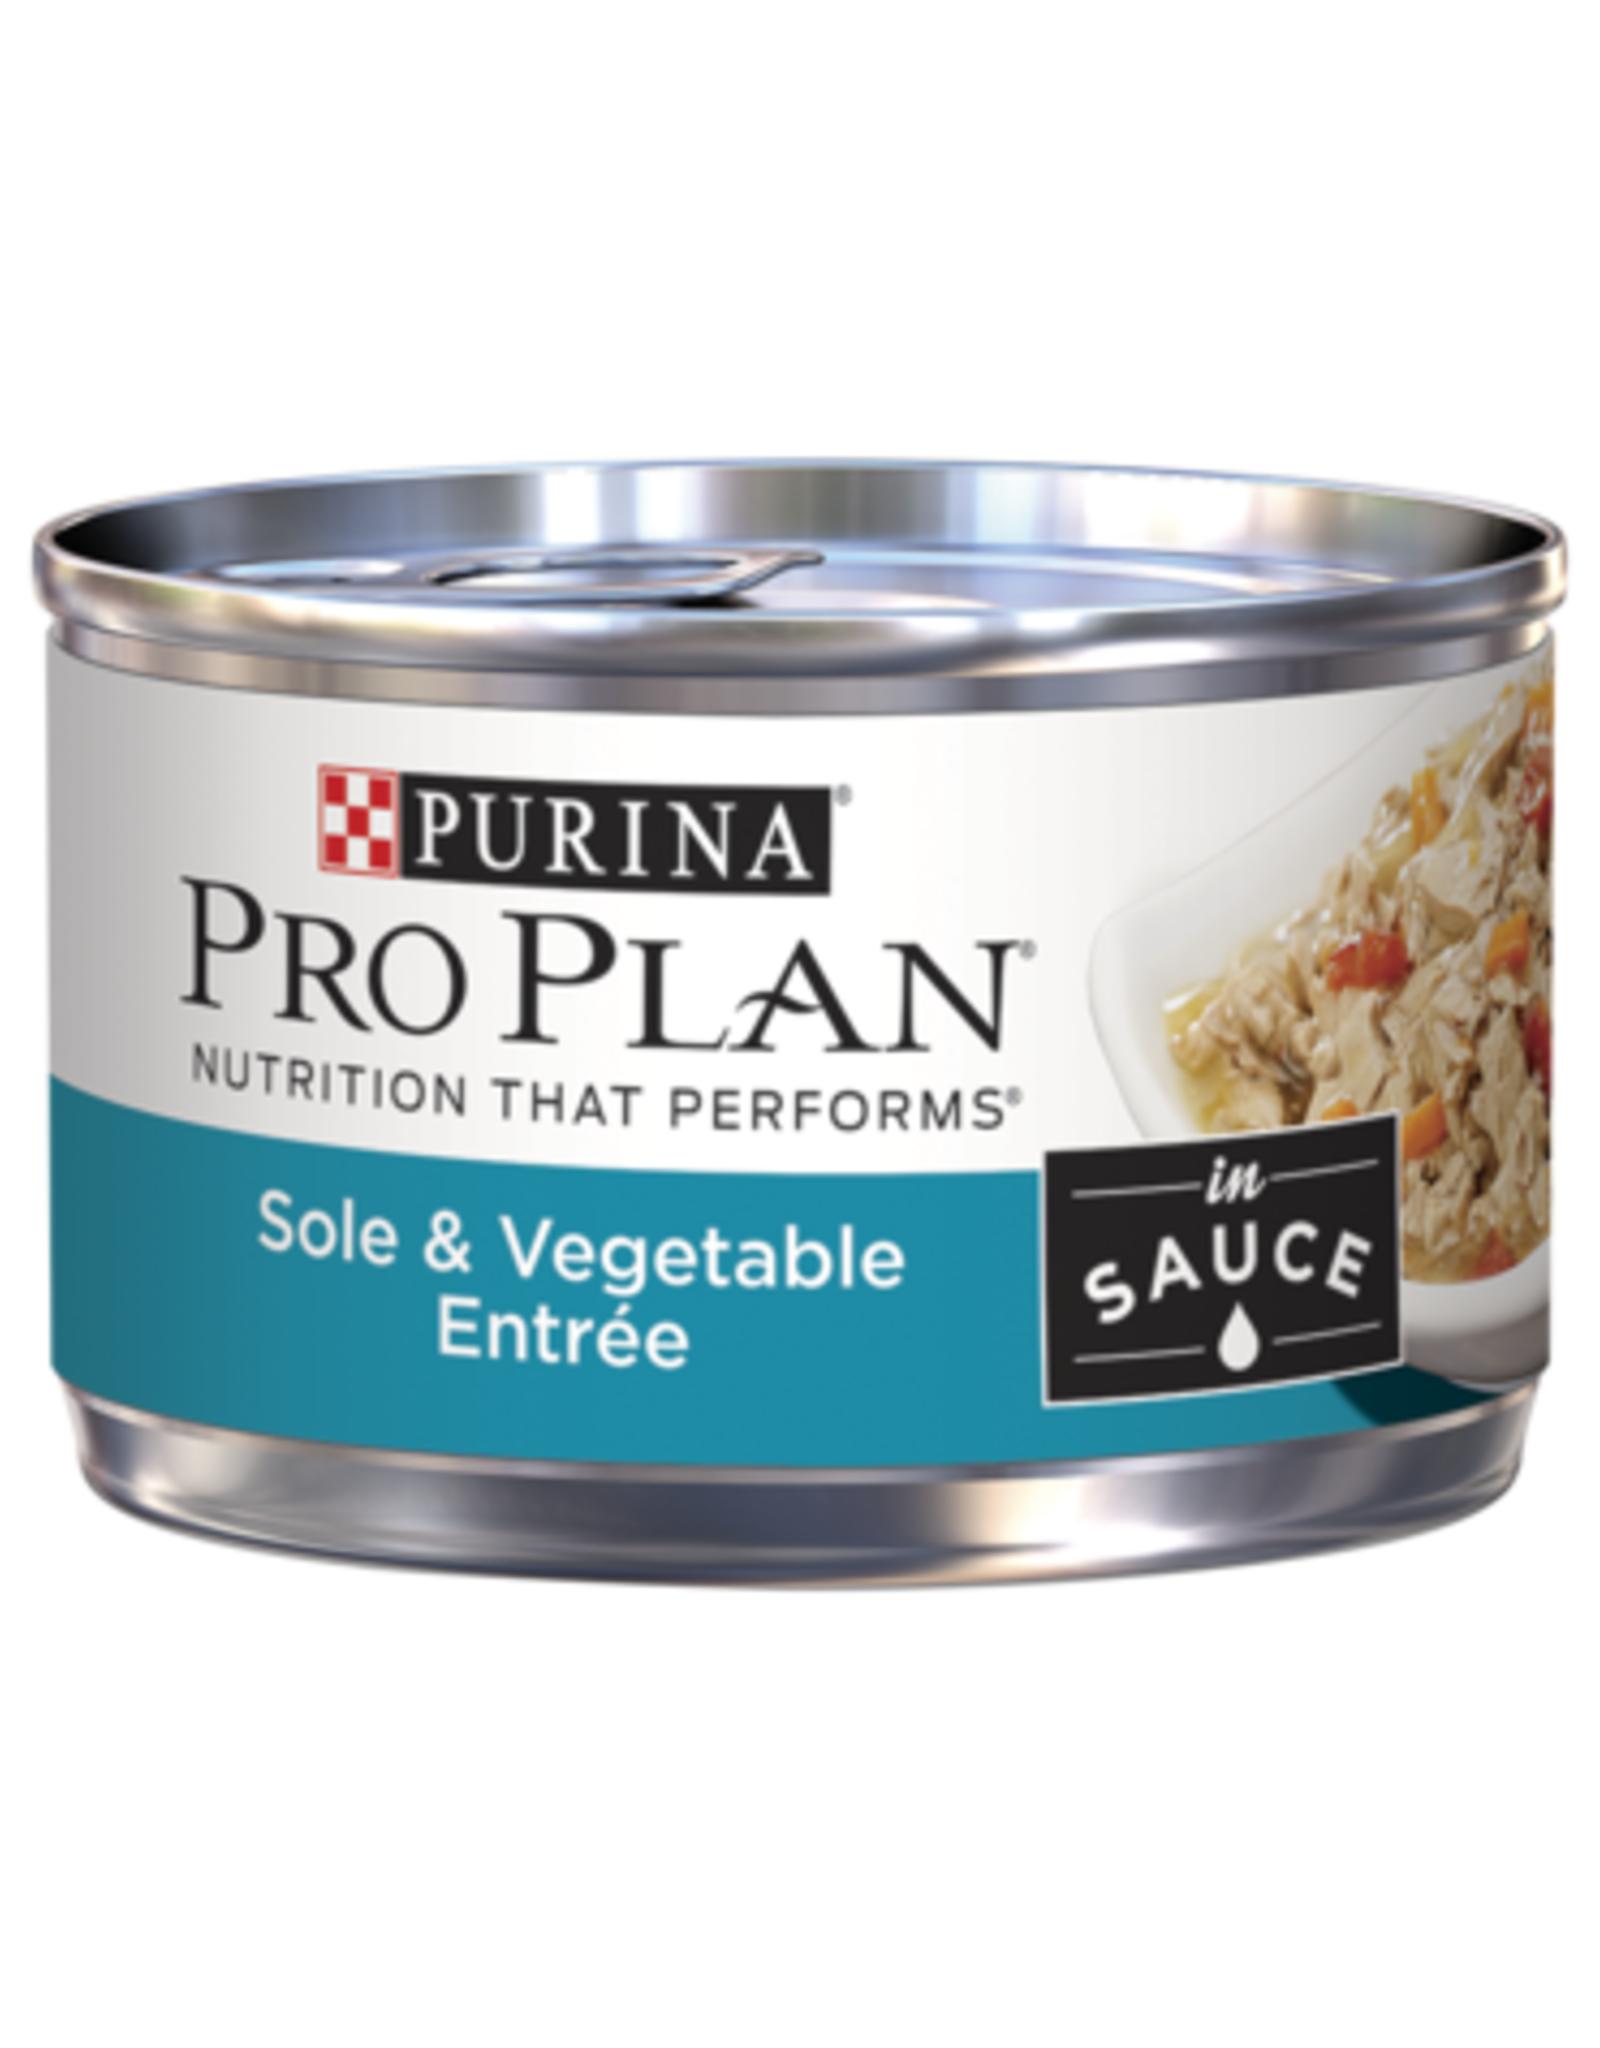 NESTLE PURINA PETCARE PRO PLAN CAT CAN SOLE & VEGETABLE ENTREE 3OZ CASE OF 24